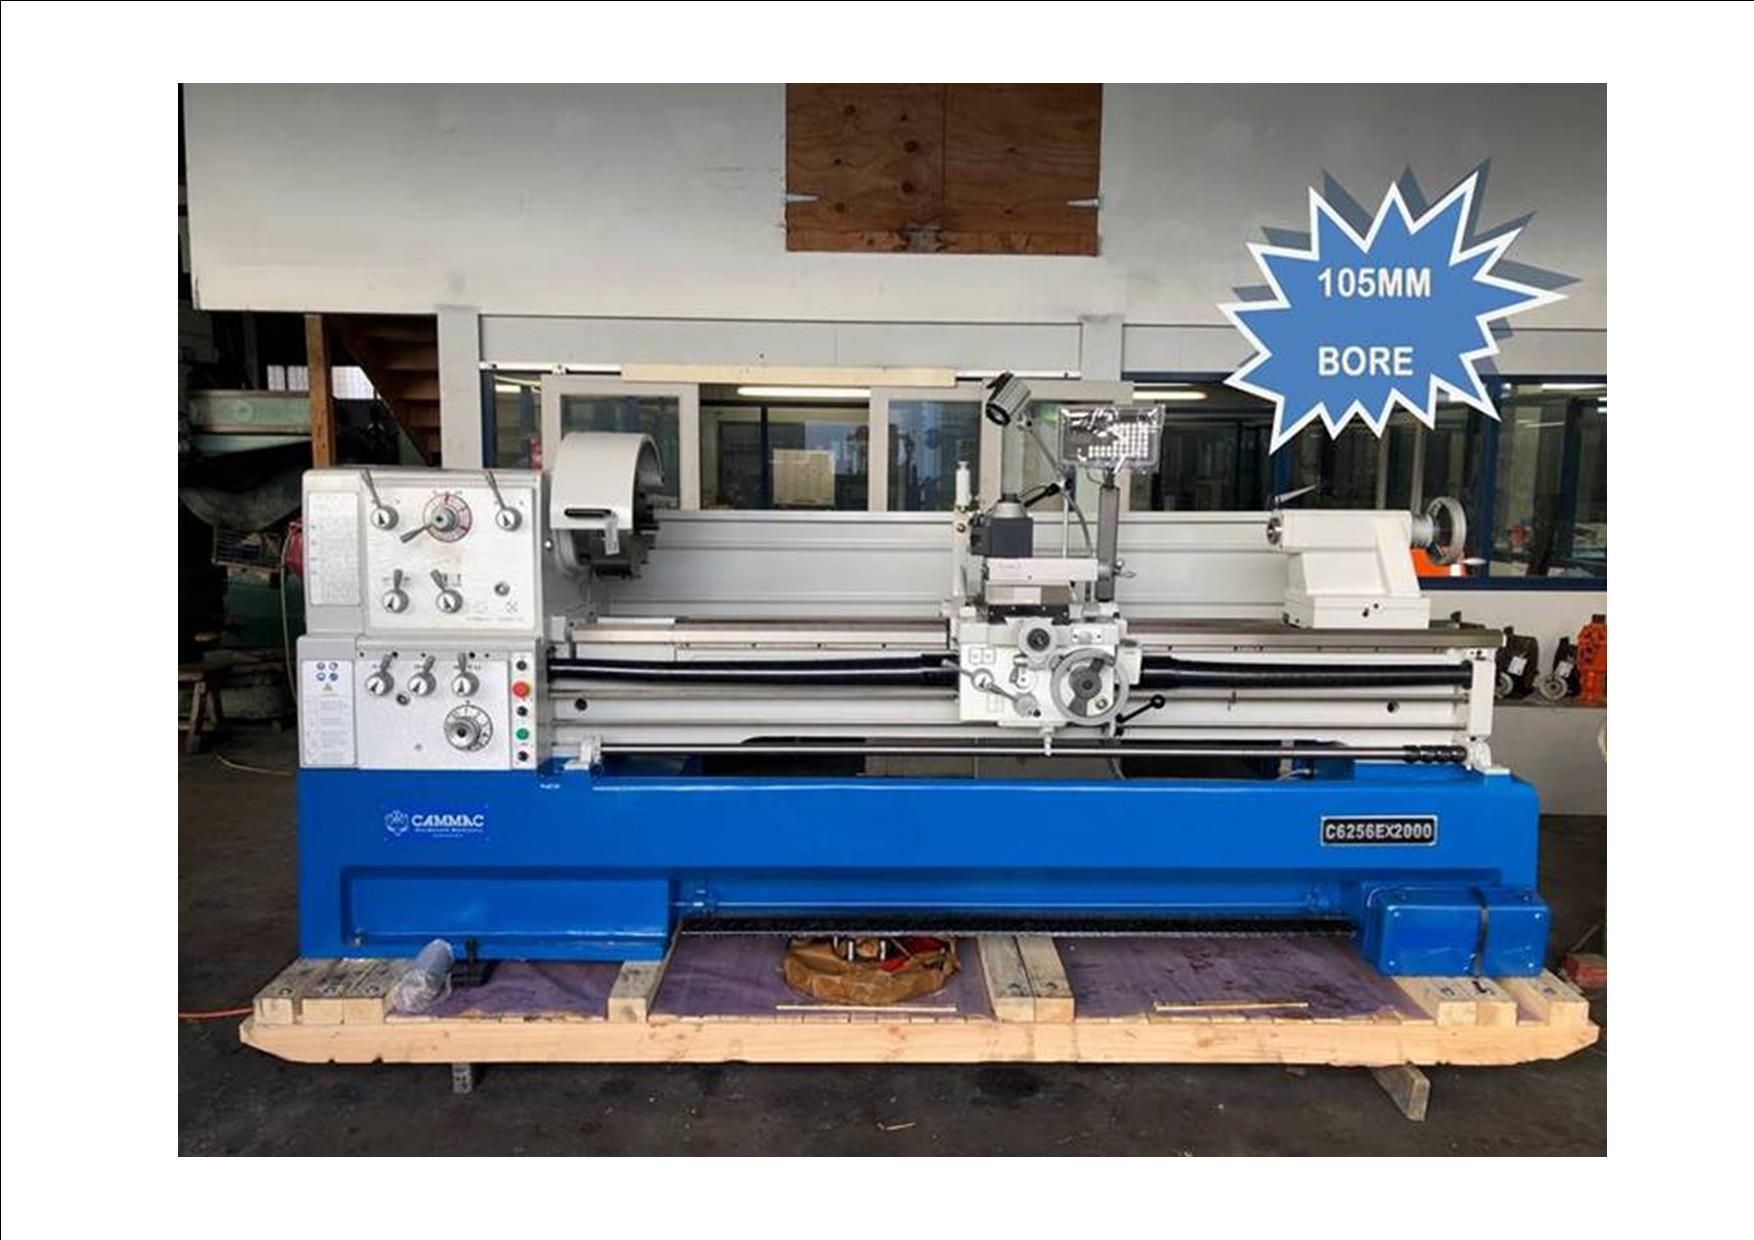 Lathe Cammac C6256/2000 560mm swing (788 in gap) 105mm spindle, 3 phase 10hp motor, 25-1600rpm, digital readout, quick change toolpost etc 